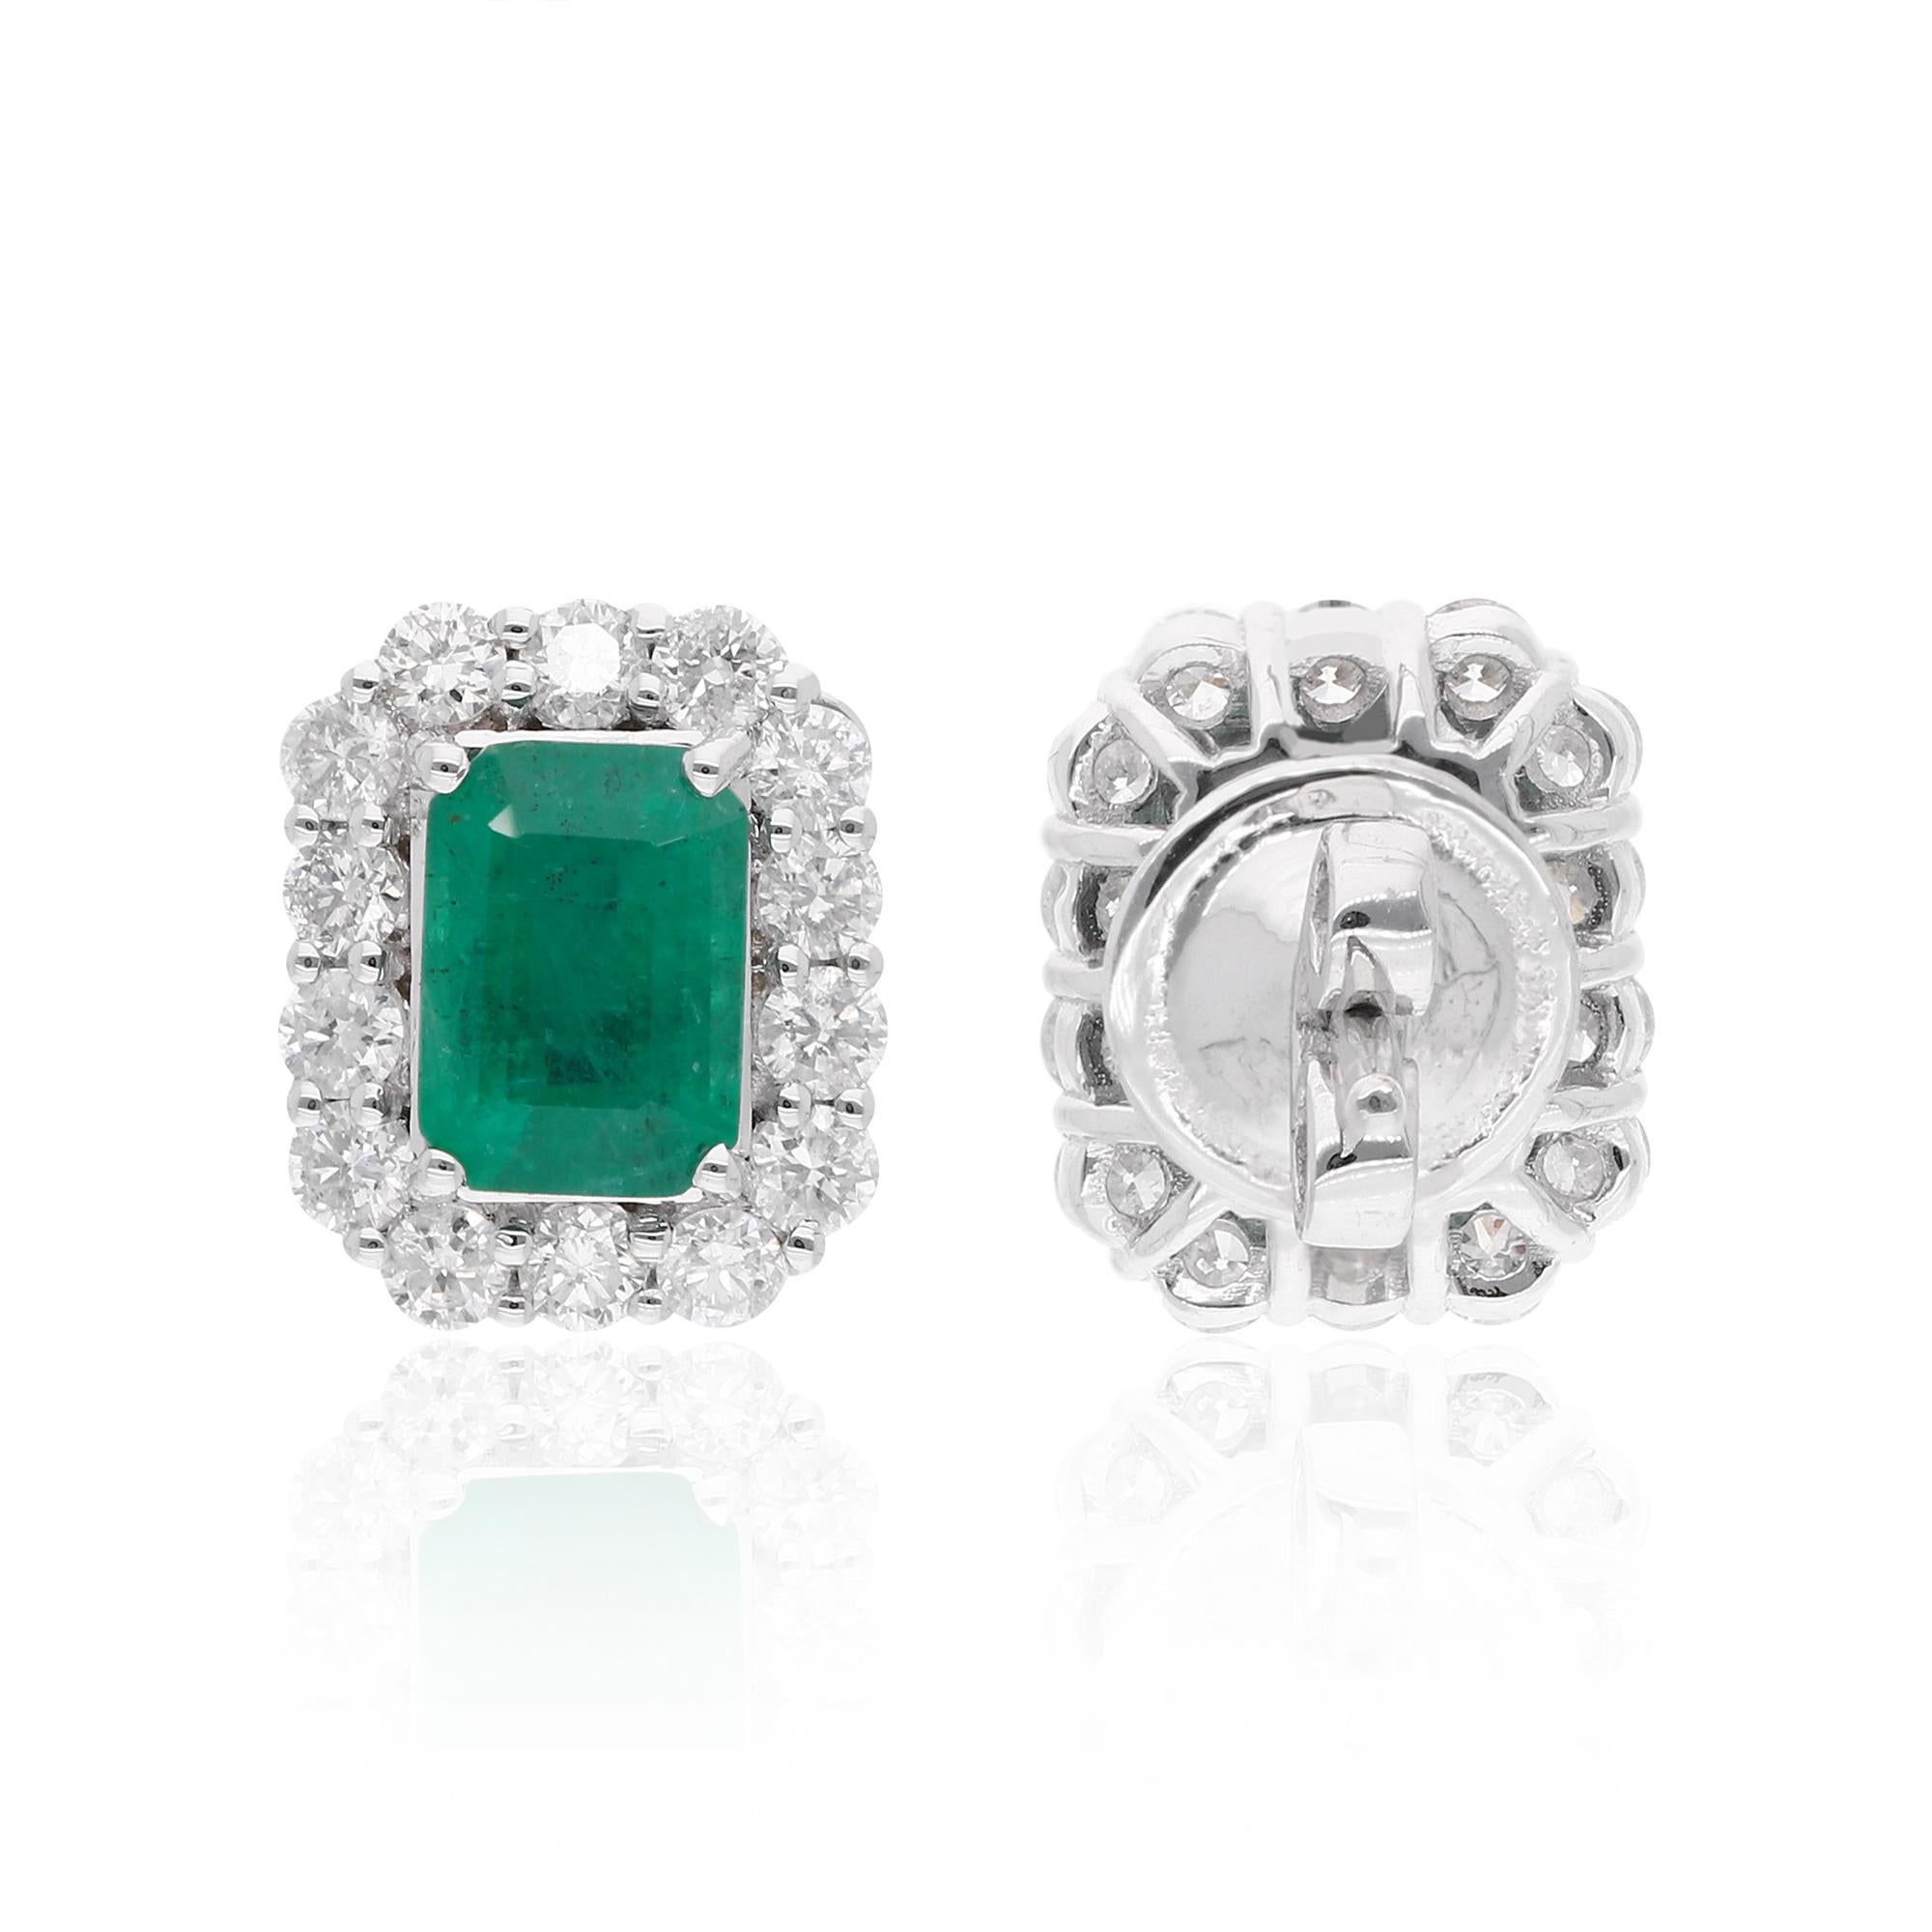 experience the captivating allure of these stud earrings, adorned with Zambian emerald gemstones and diamond pavé, set in 14-karat white gold. Meticulously crafted with attention to detail, these earrings exude timeless elegance and